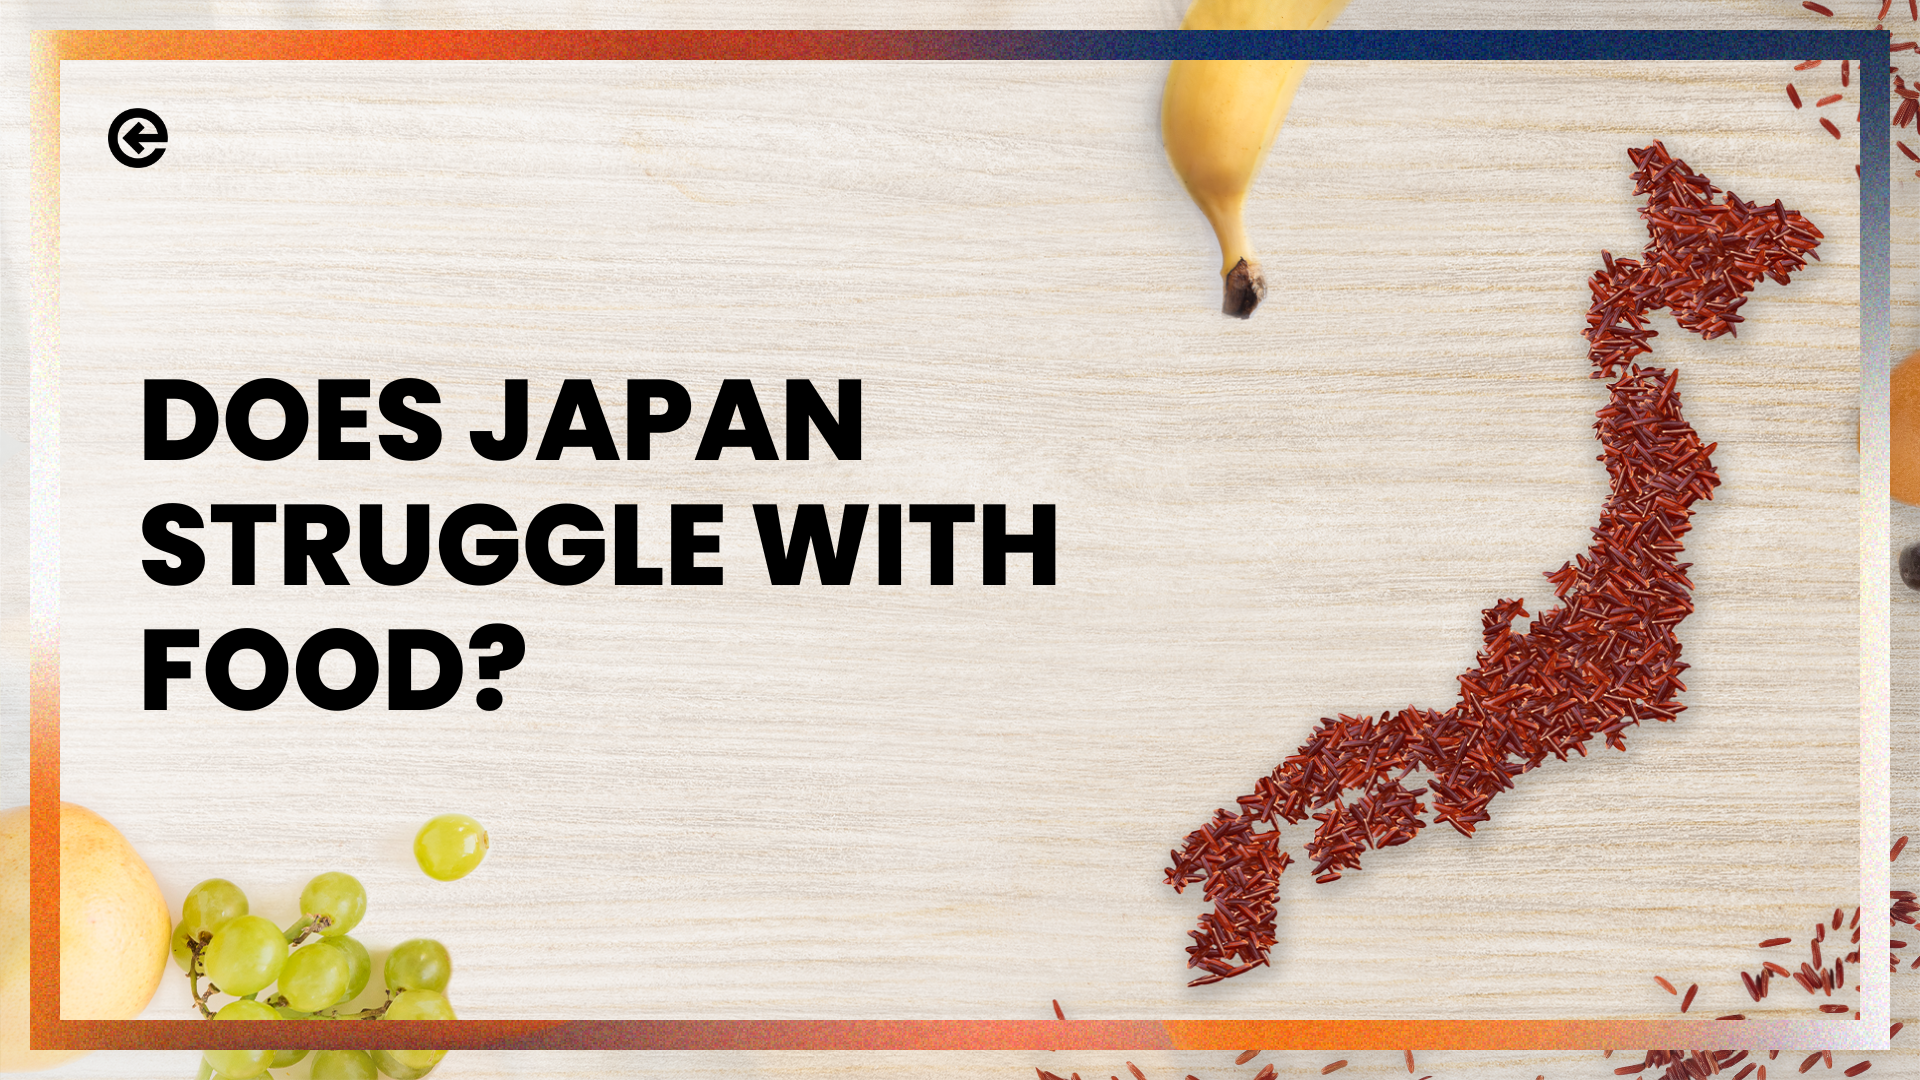 Does Japan Struggle With Food?